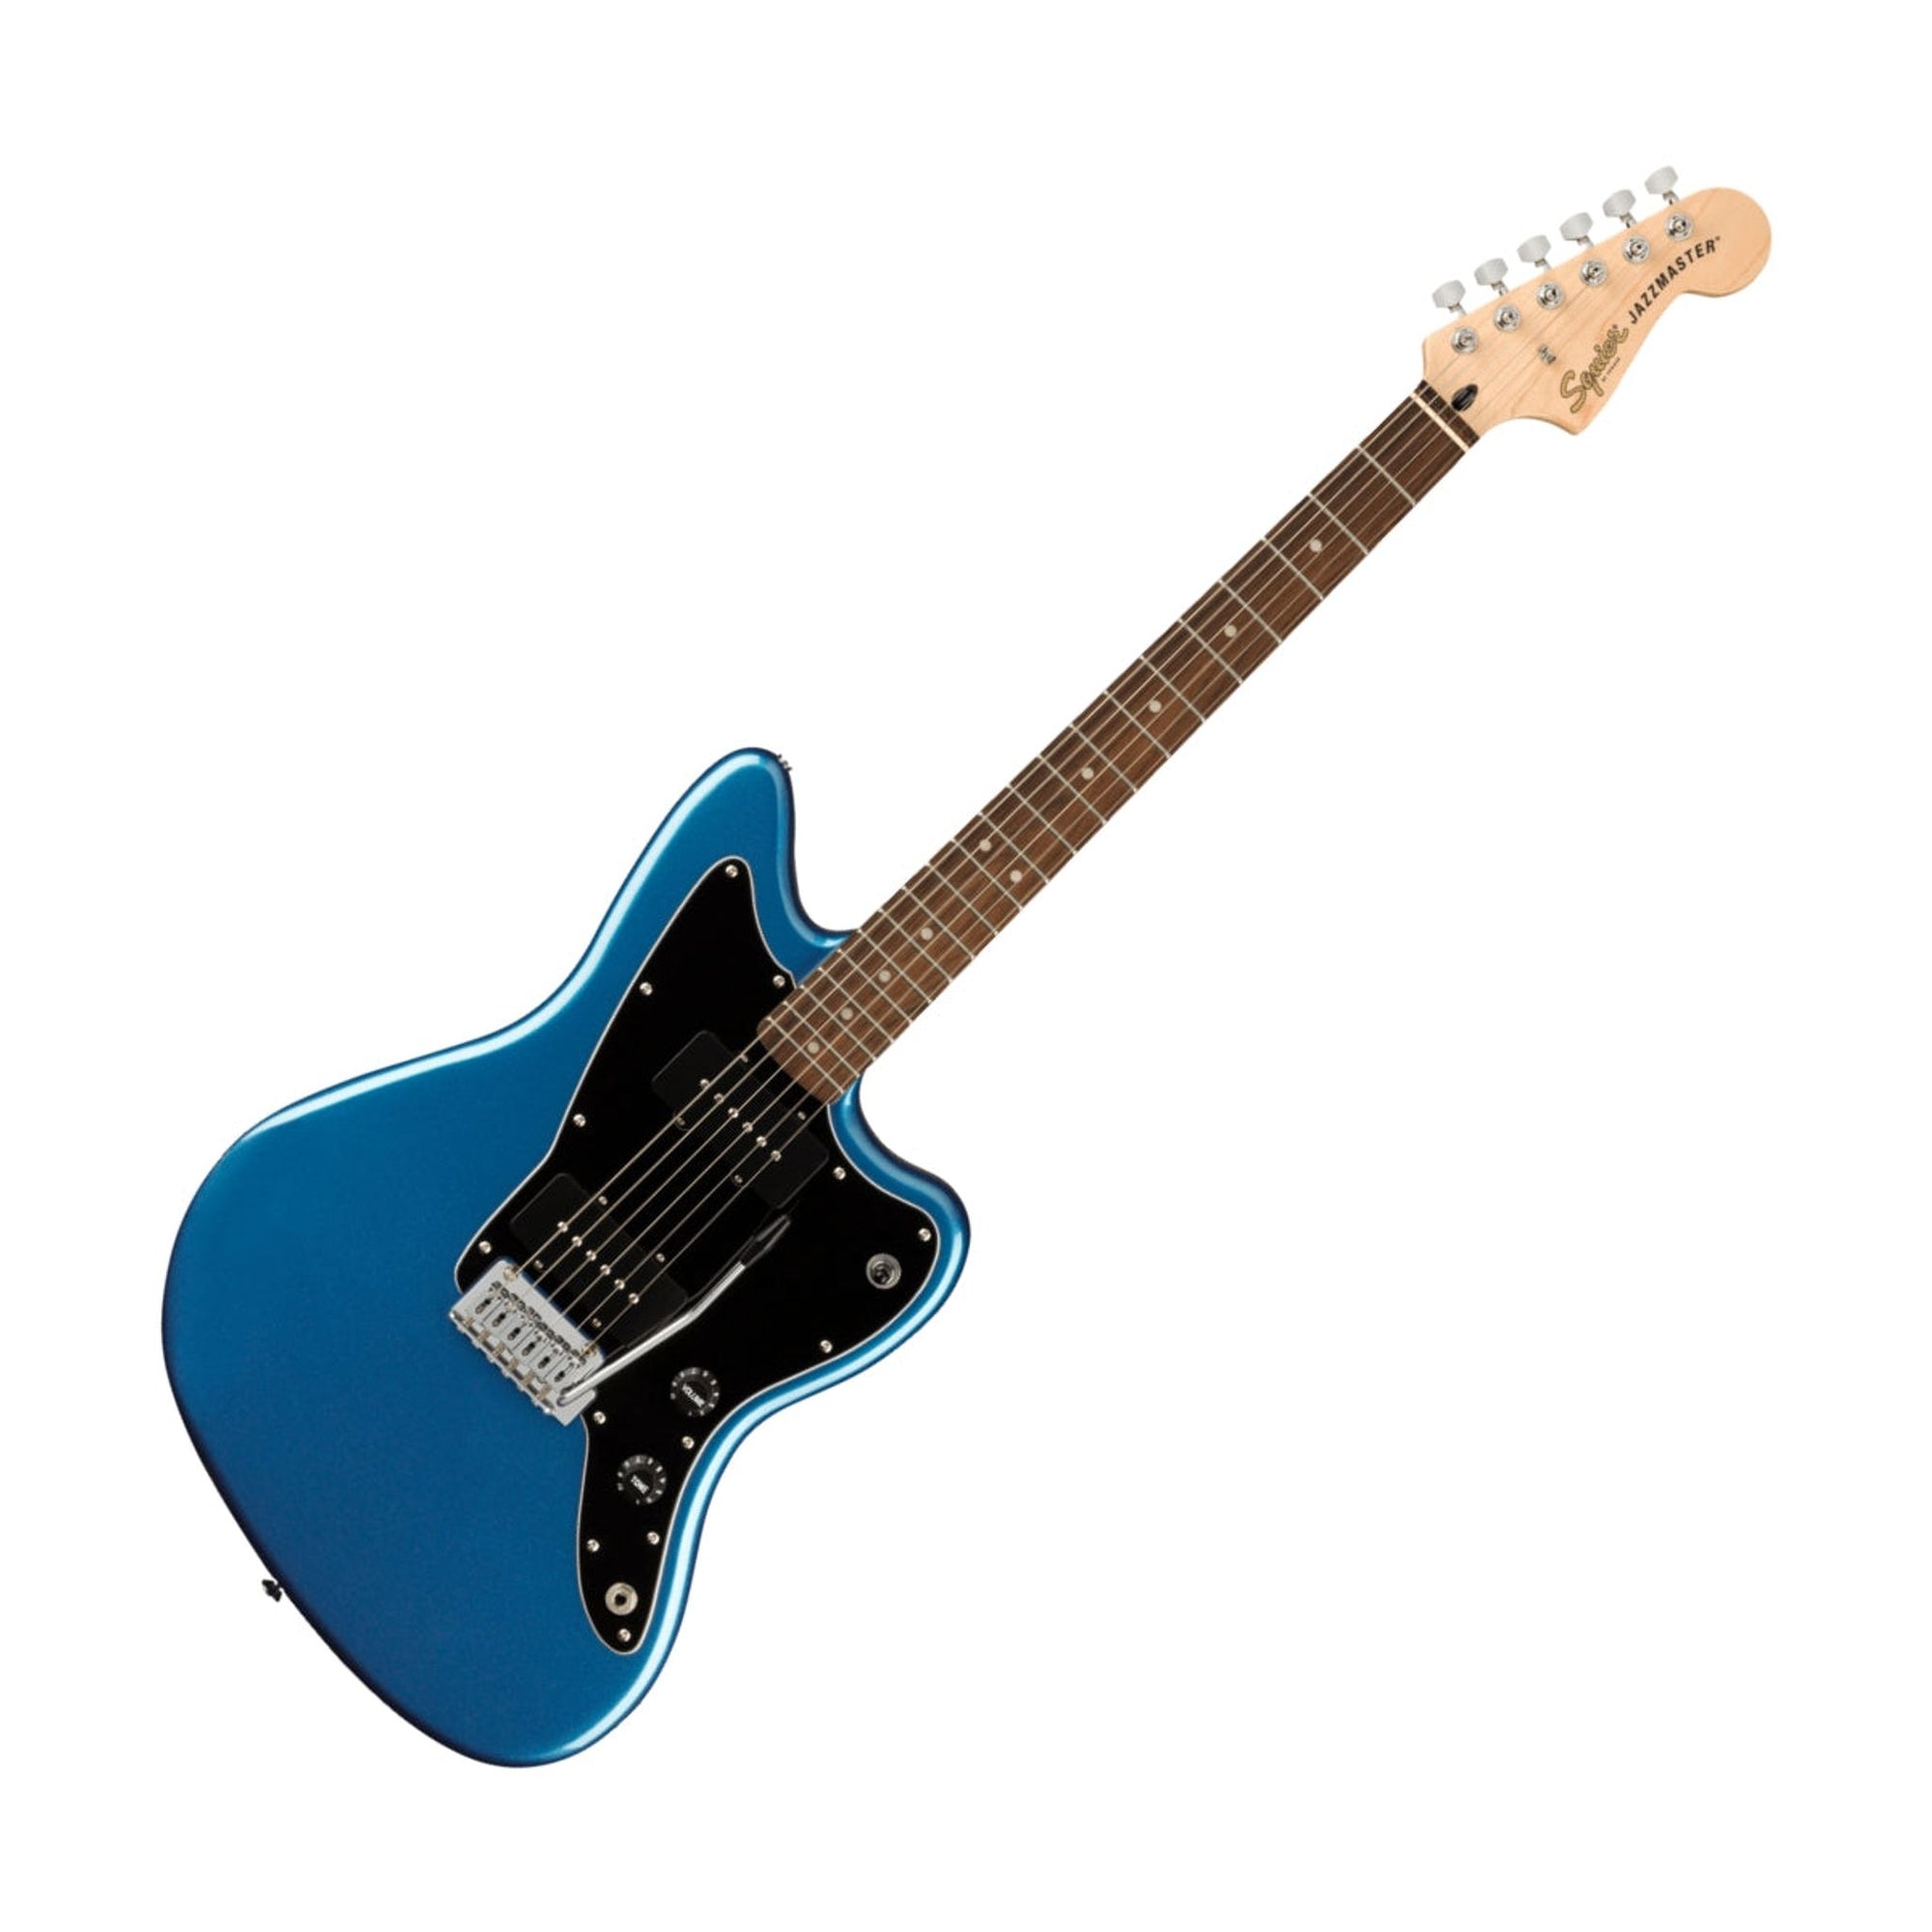 The Fender Squier Jazzmaster delivers legendary design and quintessential tone for today’s aspiring guitar hero is ready to accompany any player at any stage.